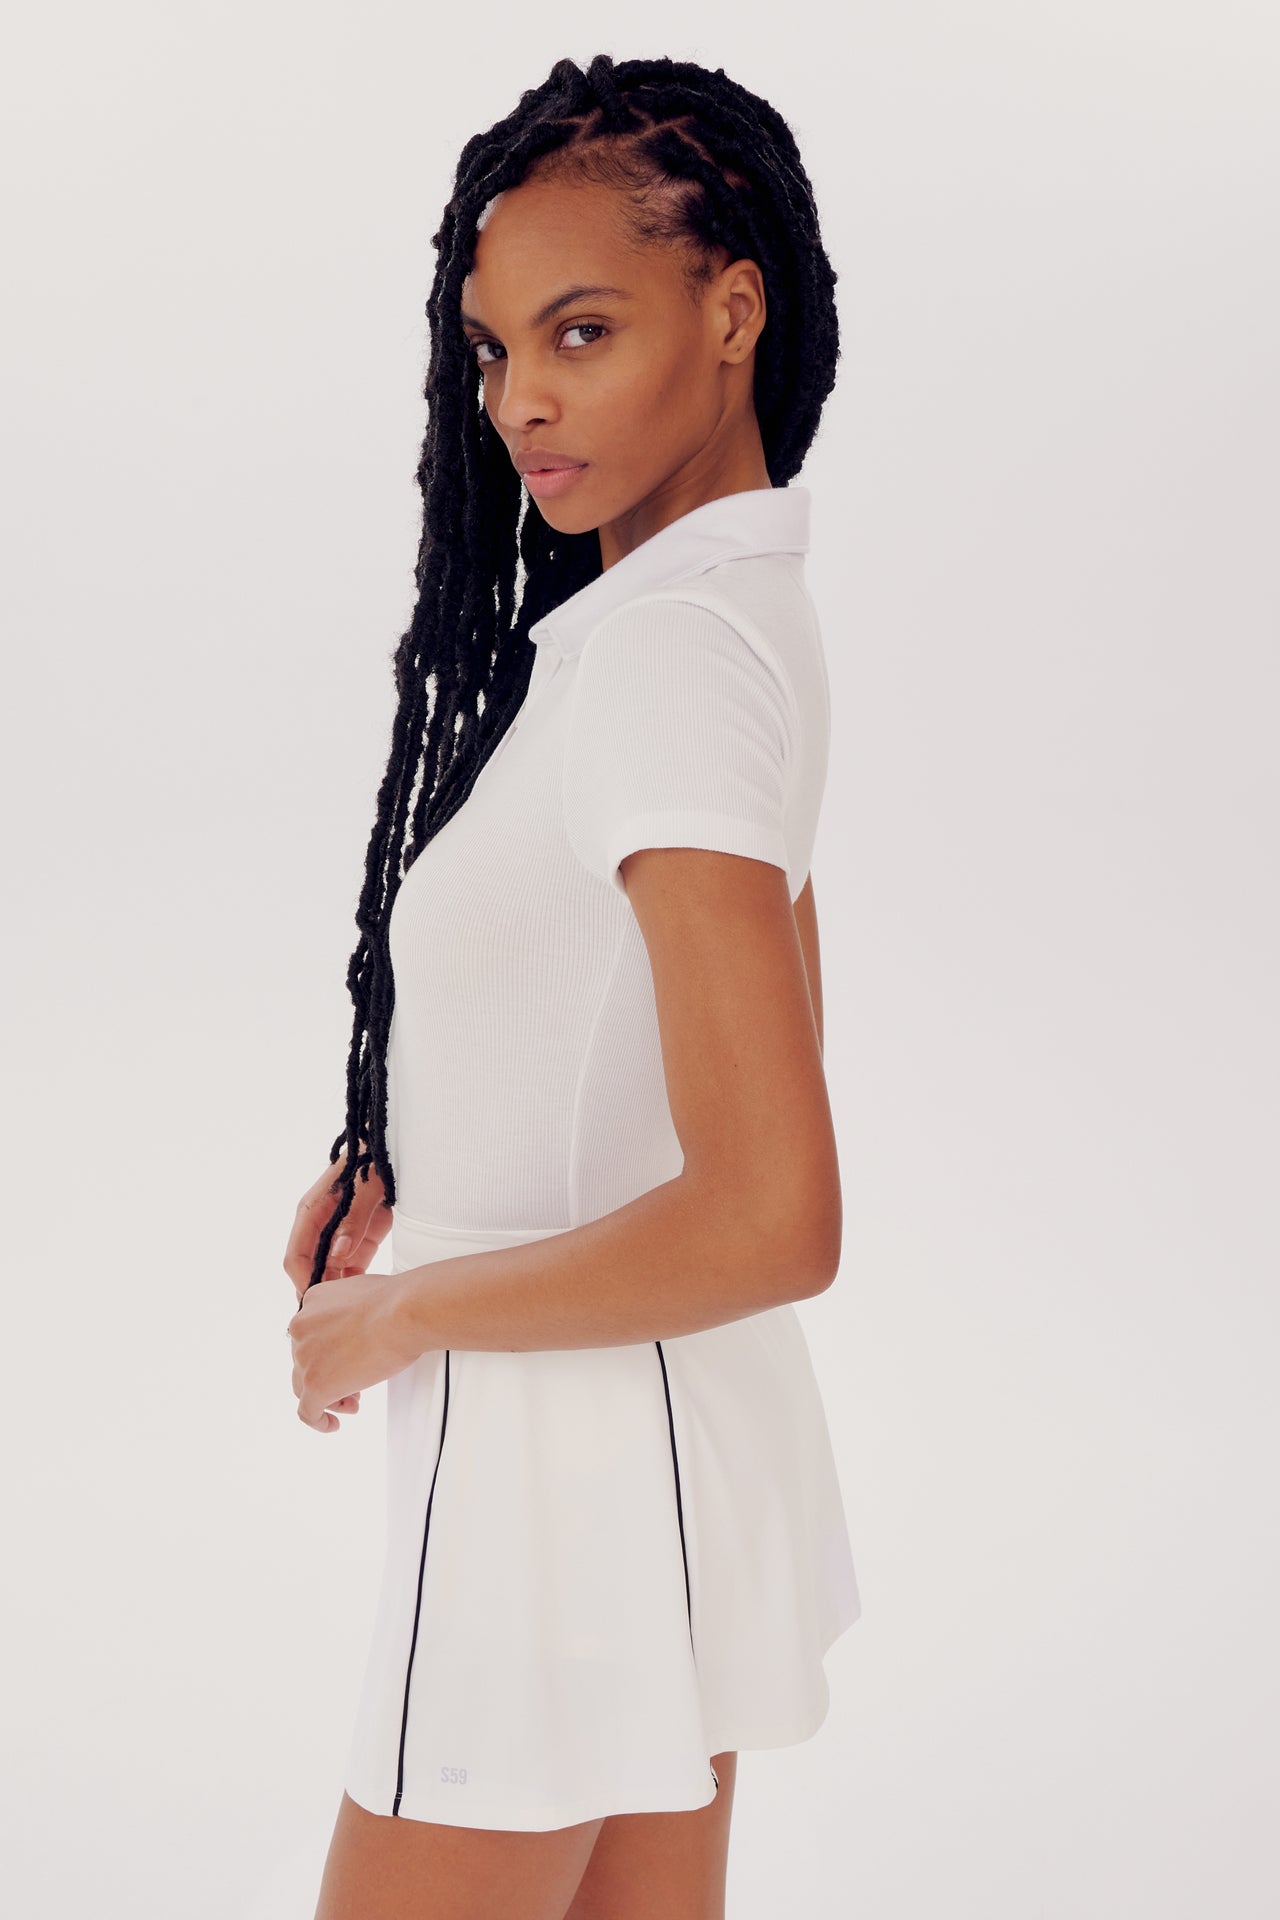 A young woman wearing a SPLITS59 Talia Rib Polo in white, posing side-profile with her hair styled in long braids, ready for a yoga session.